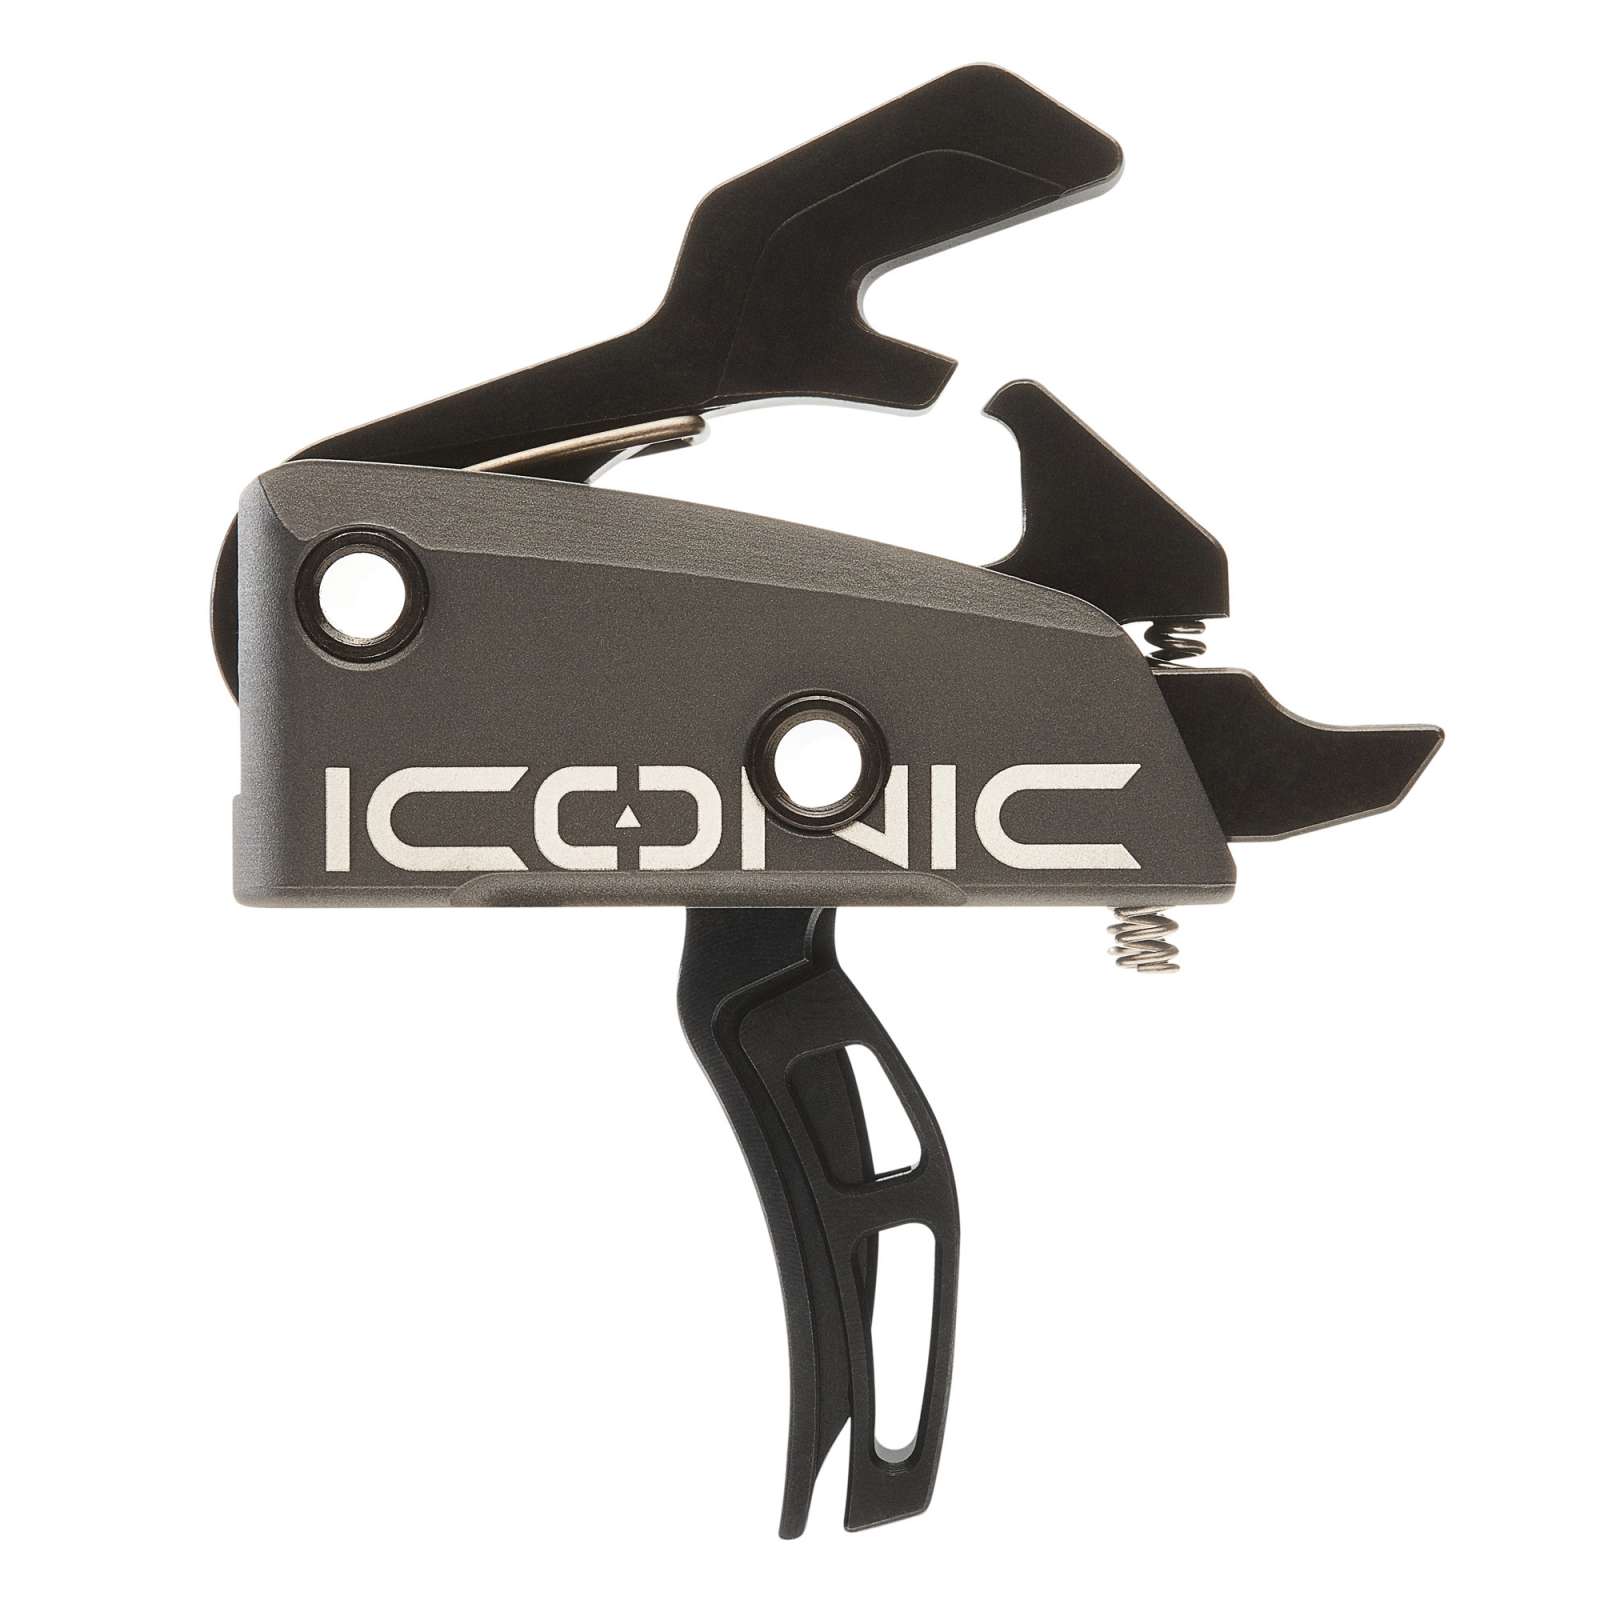 RISE ICONIC DUAL-BLADE TWO-STAGE TRIGGER GRY